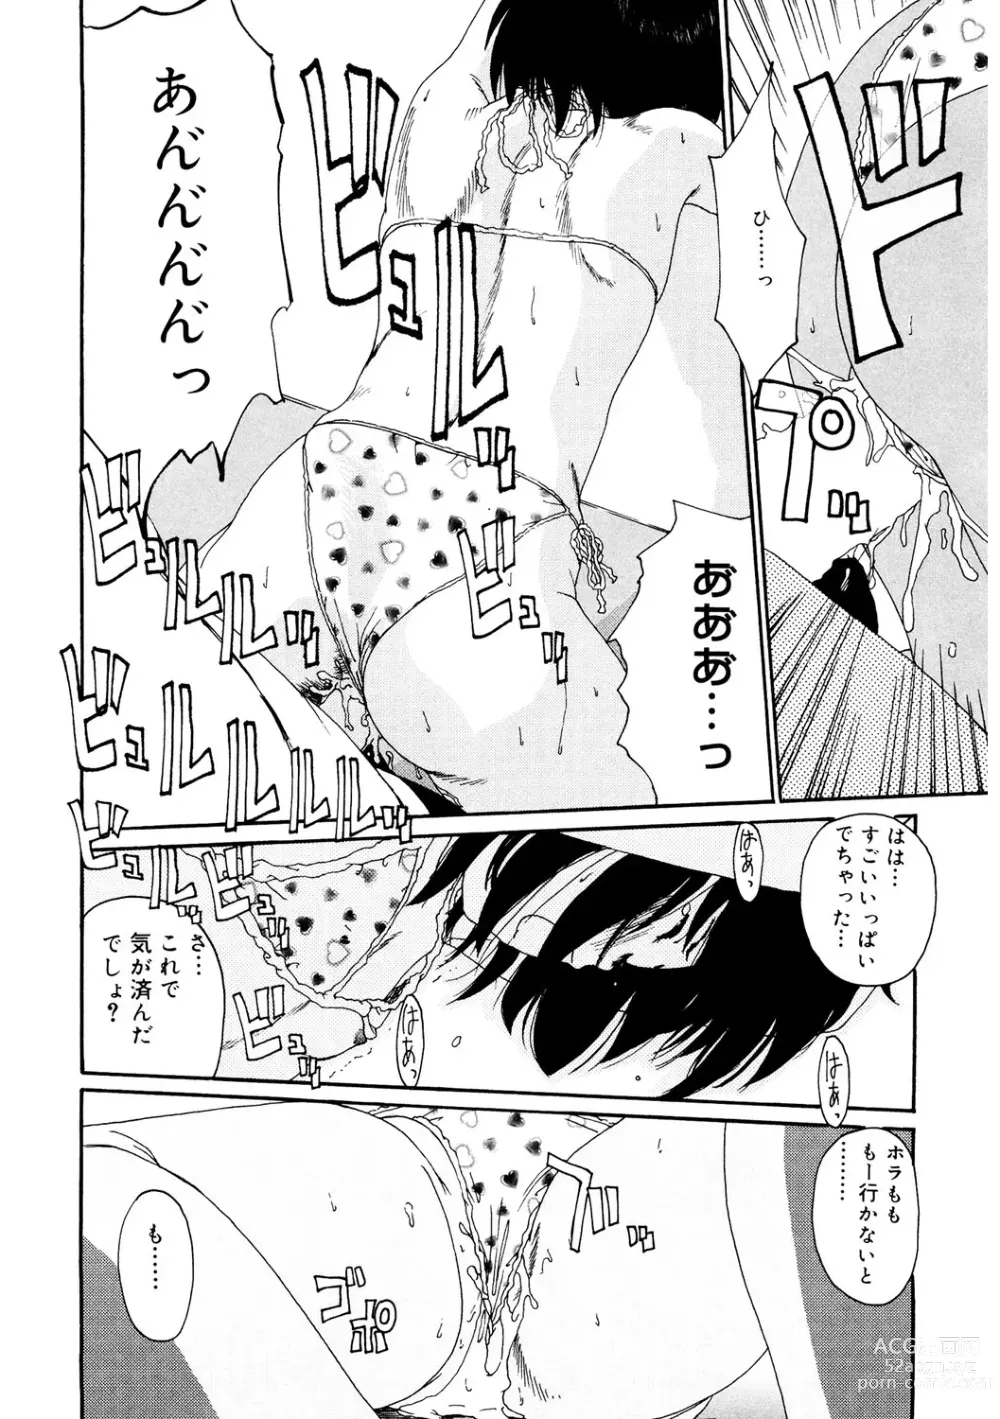 Page 194 of manga LQ -Little Queen- Vol. 52